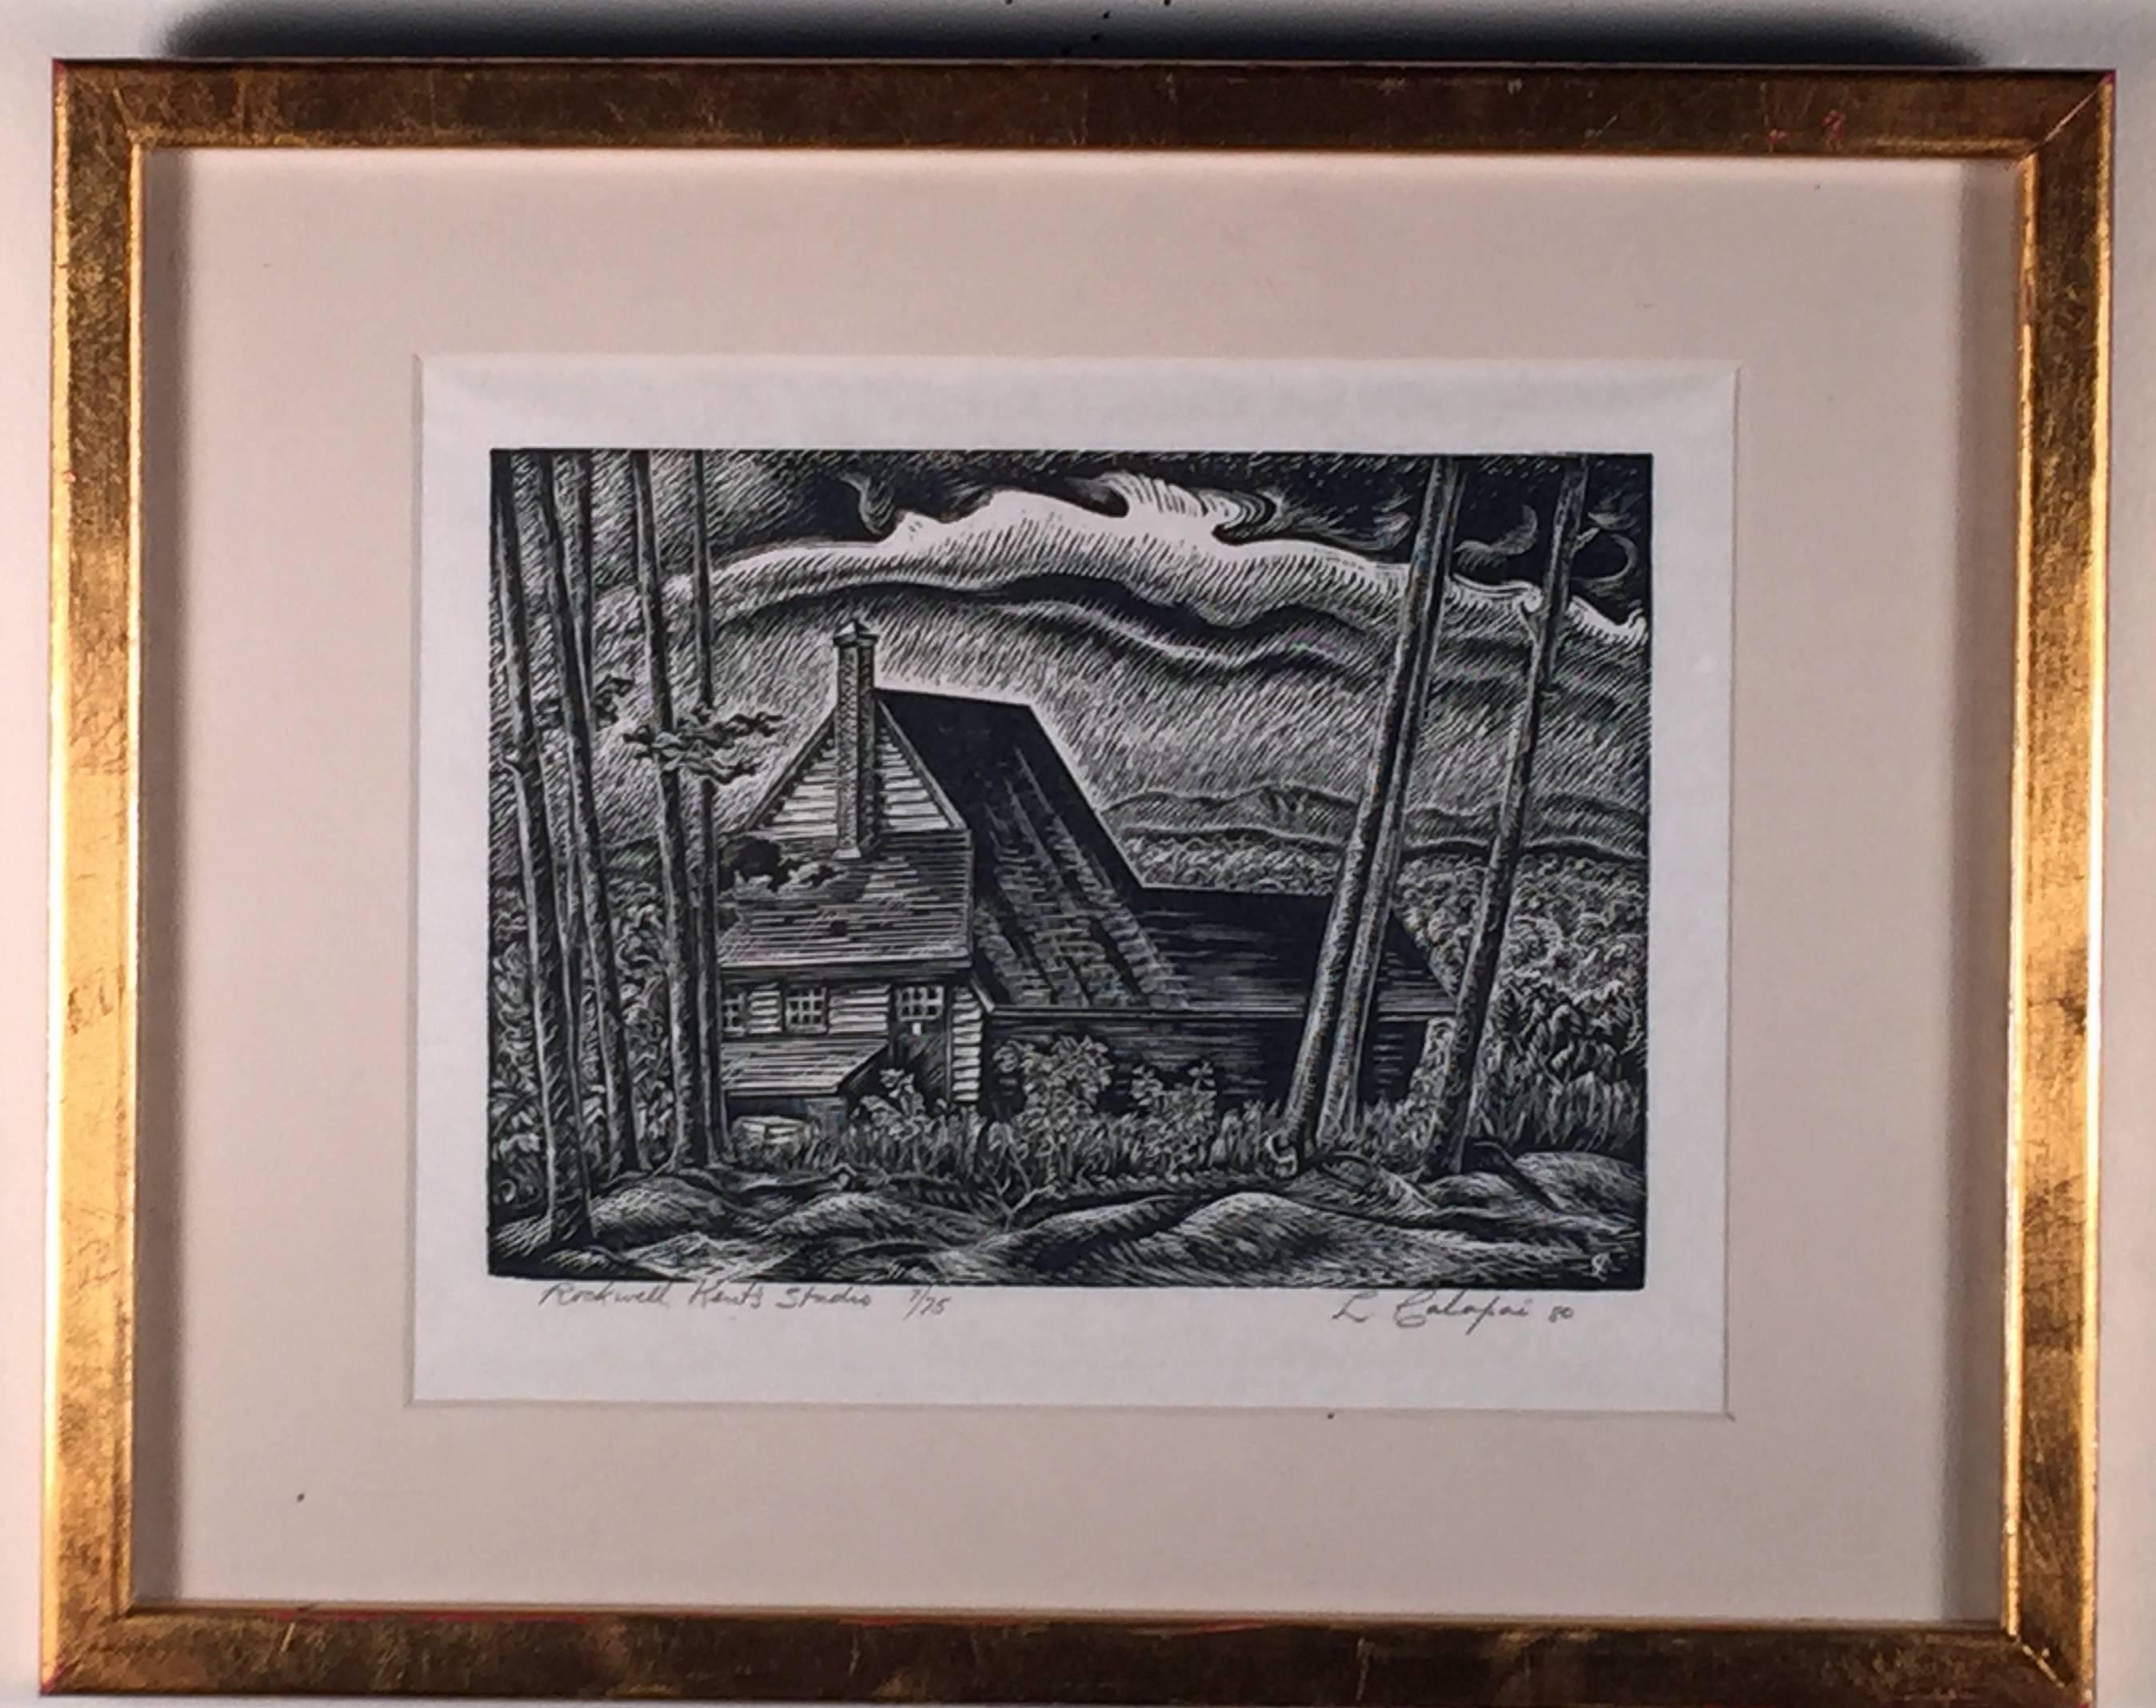 ROCKWELL KENT'S STUDIO - Print by Letterio Calapai